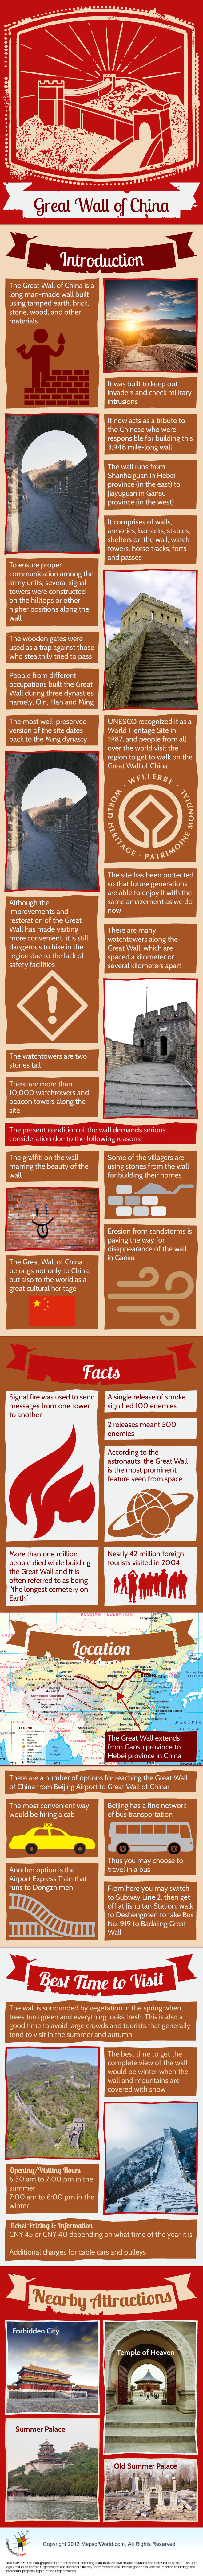 A Winding History Of The Great Wall Of China, Daily Infographic